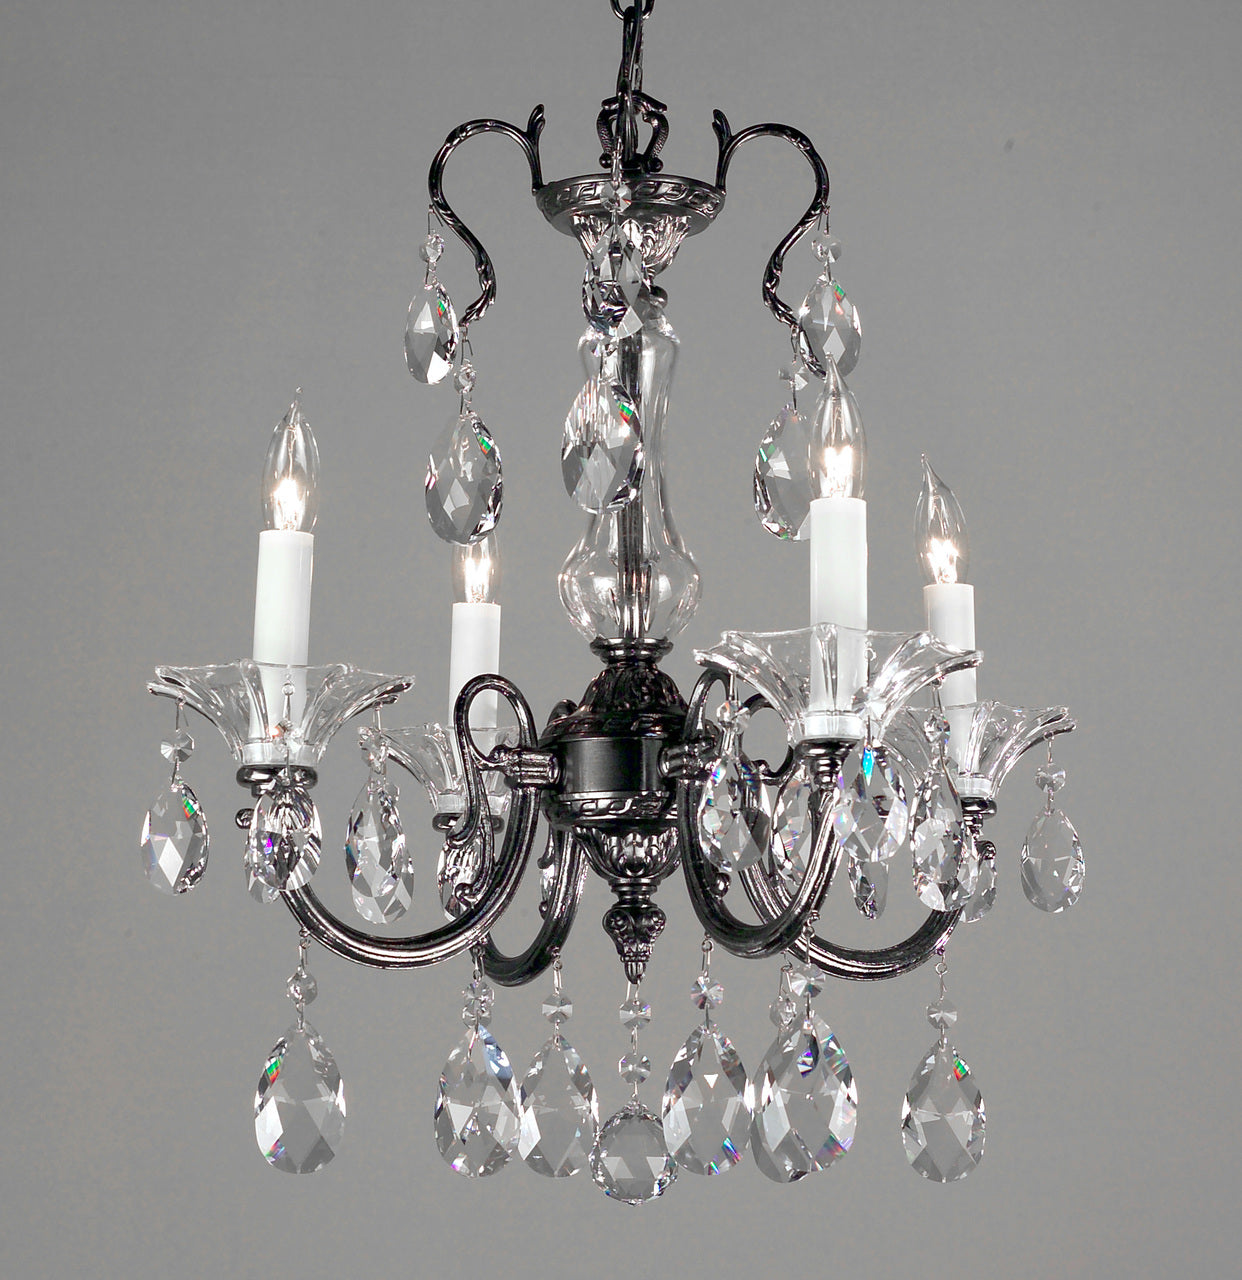 Classic Lighting 57054 G S Via Lombardi Crystal Mini Chandelier in 24k Gold (Imported from Spain)